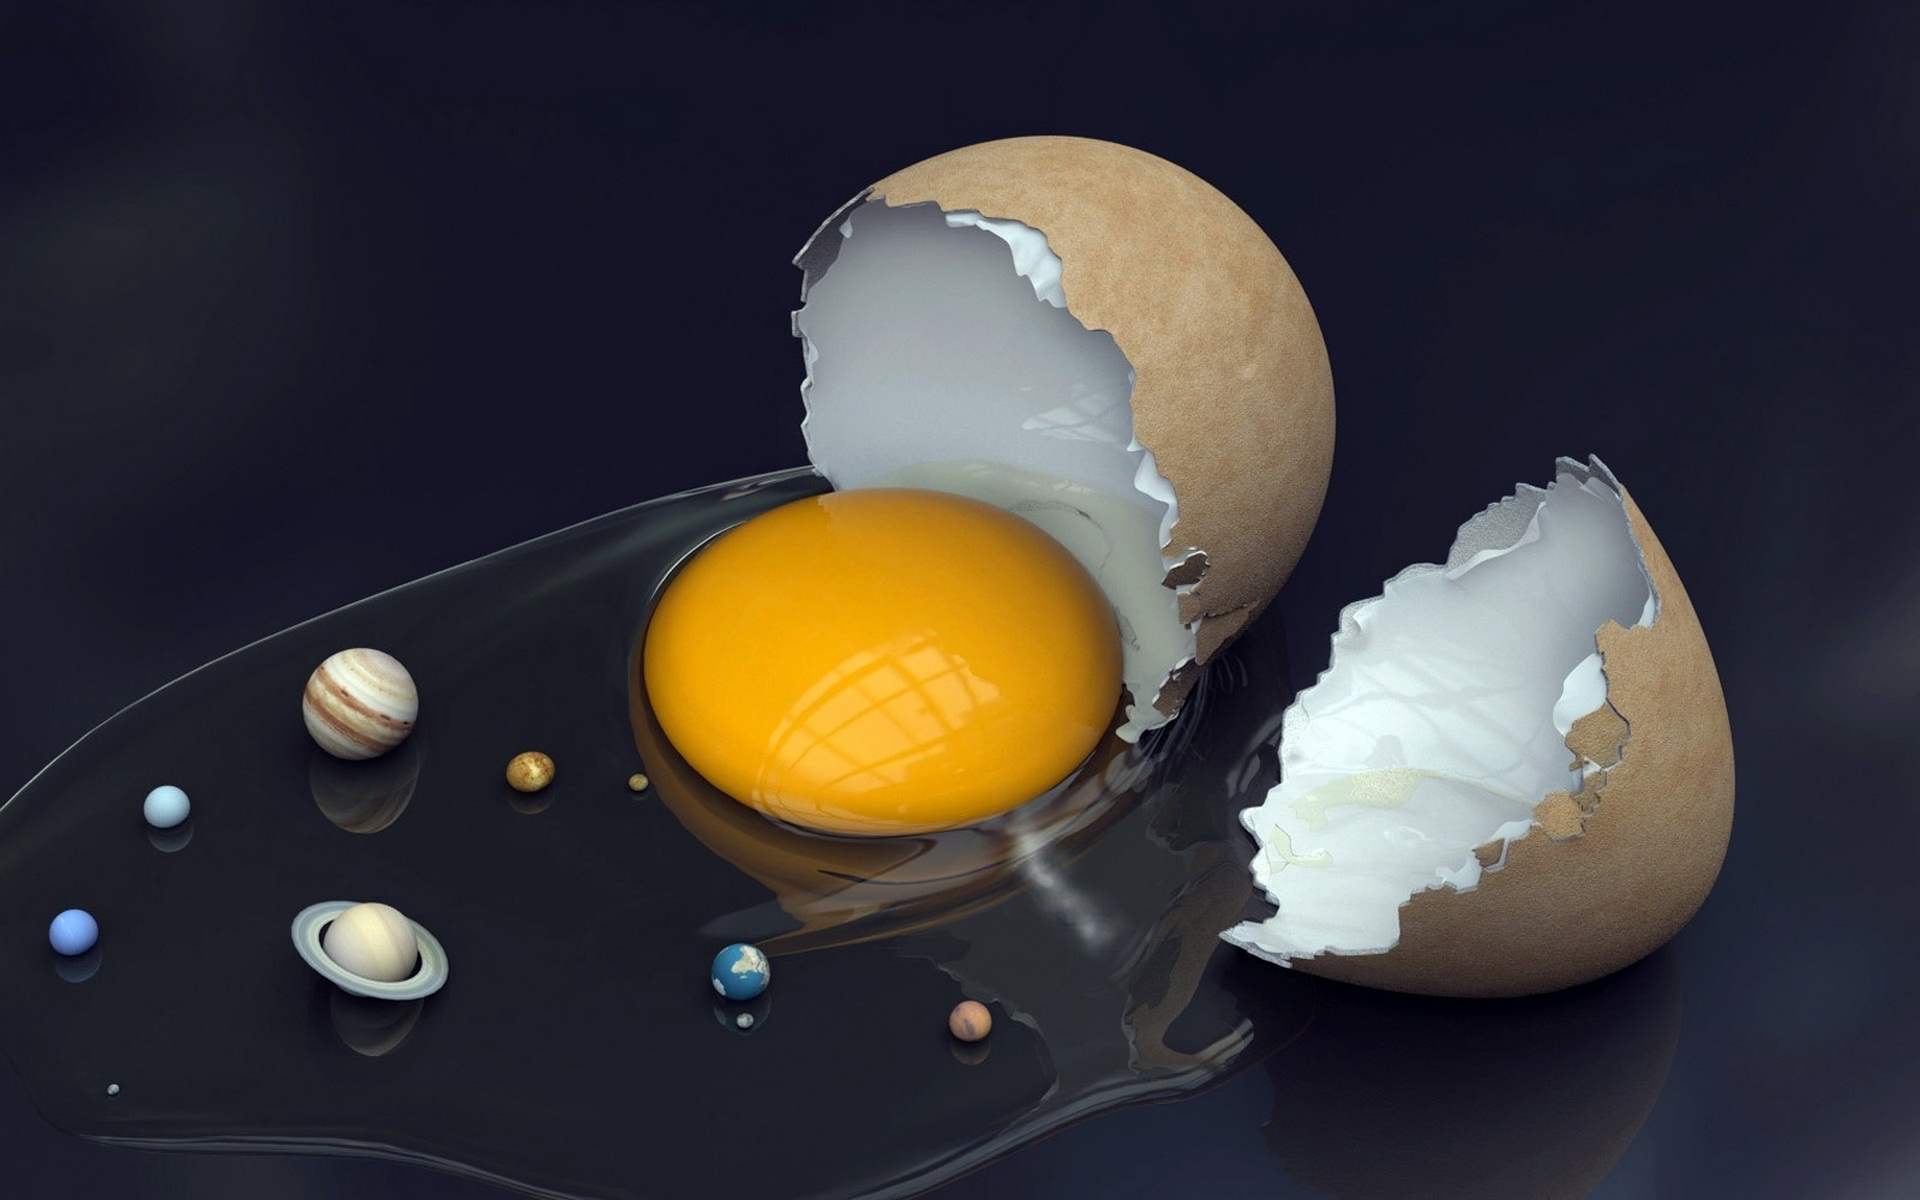 Solar System In A Cracked Egg Wallpaper